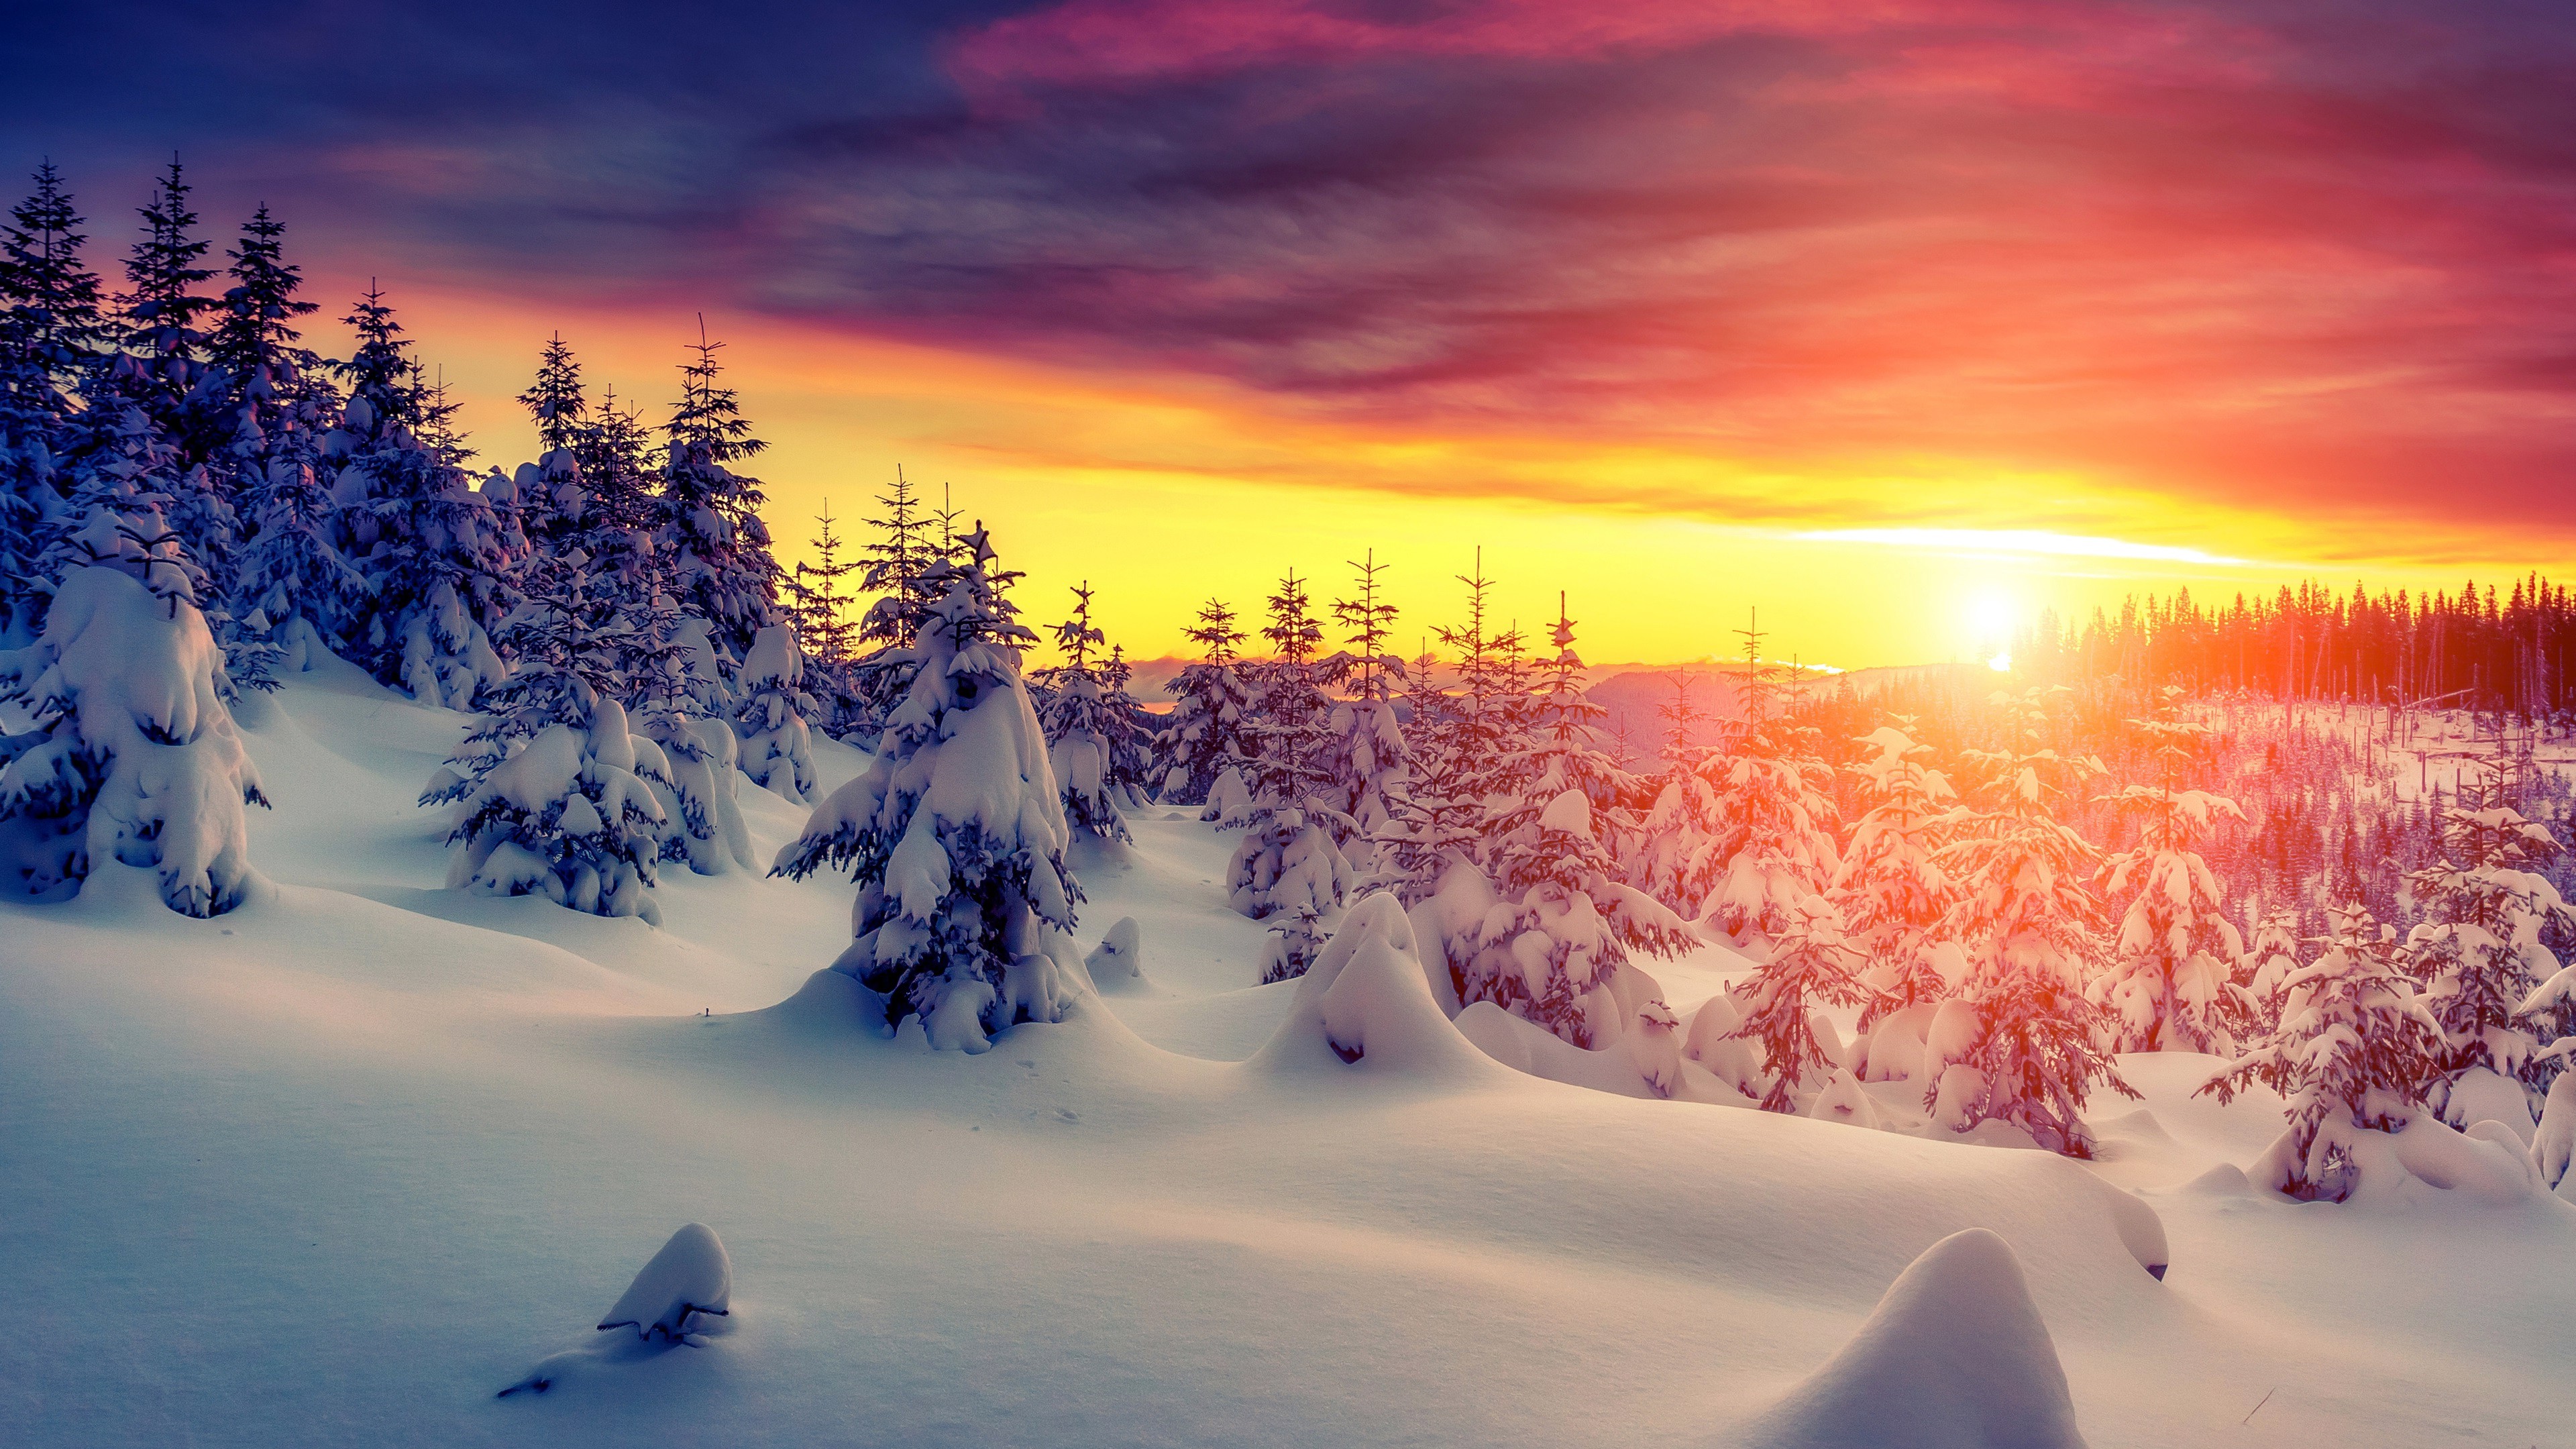 General 3840x2160 landscape snow trees sunset nature sunlight cold outdoors Sun sky